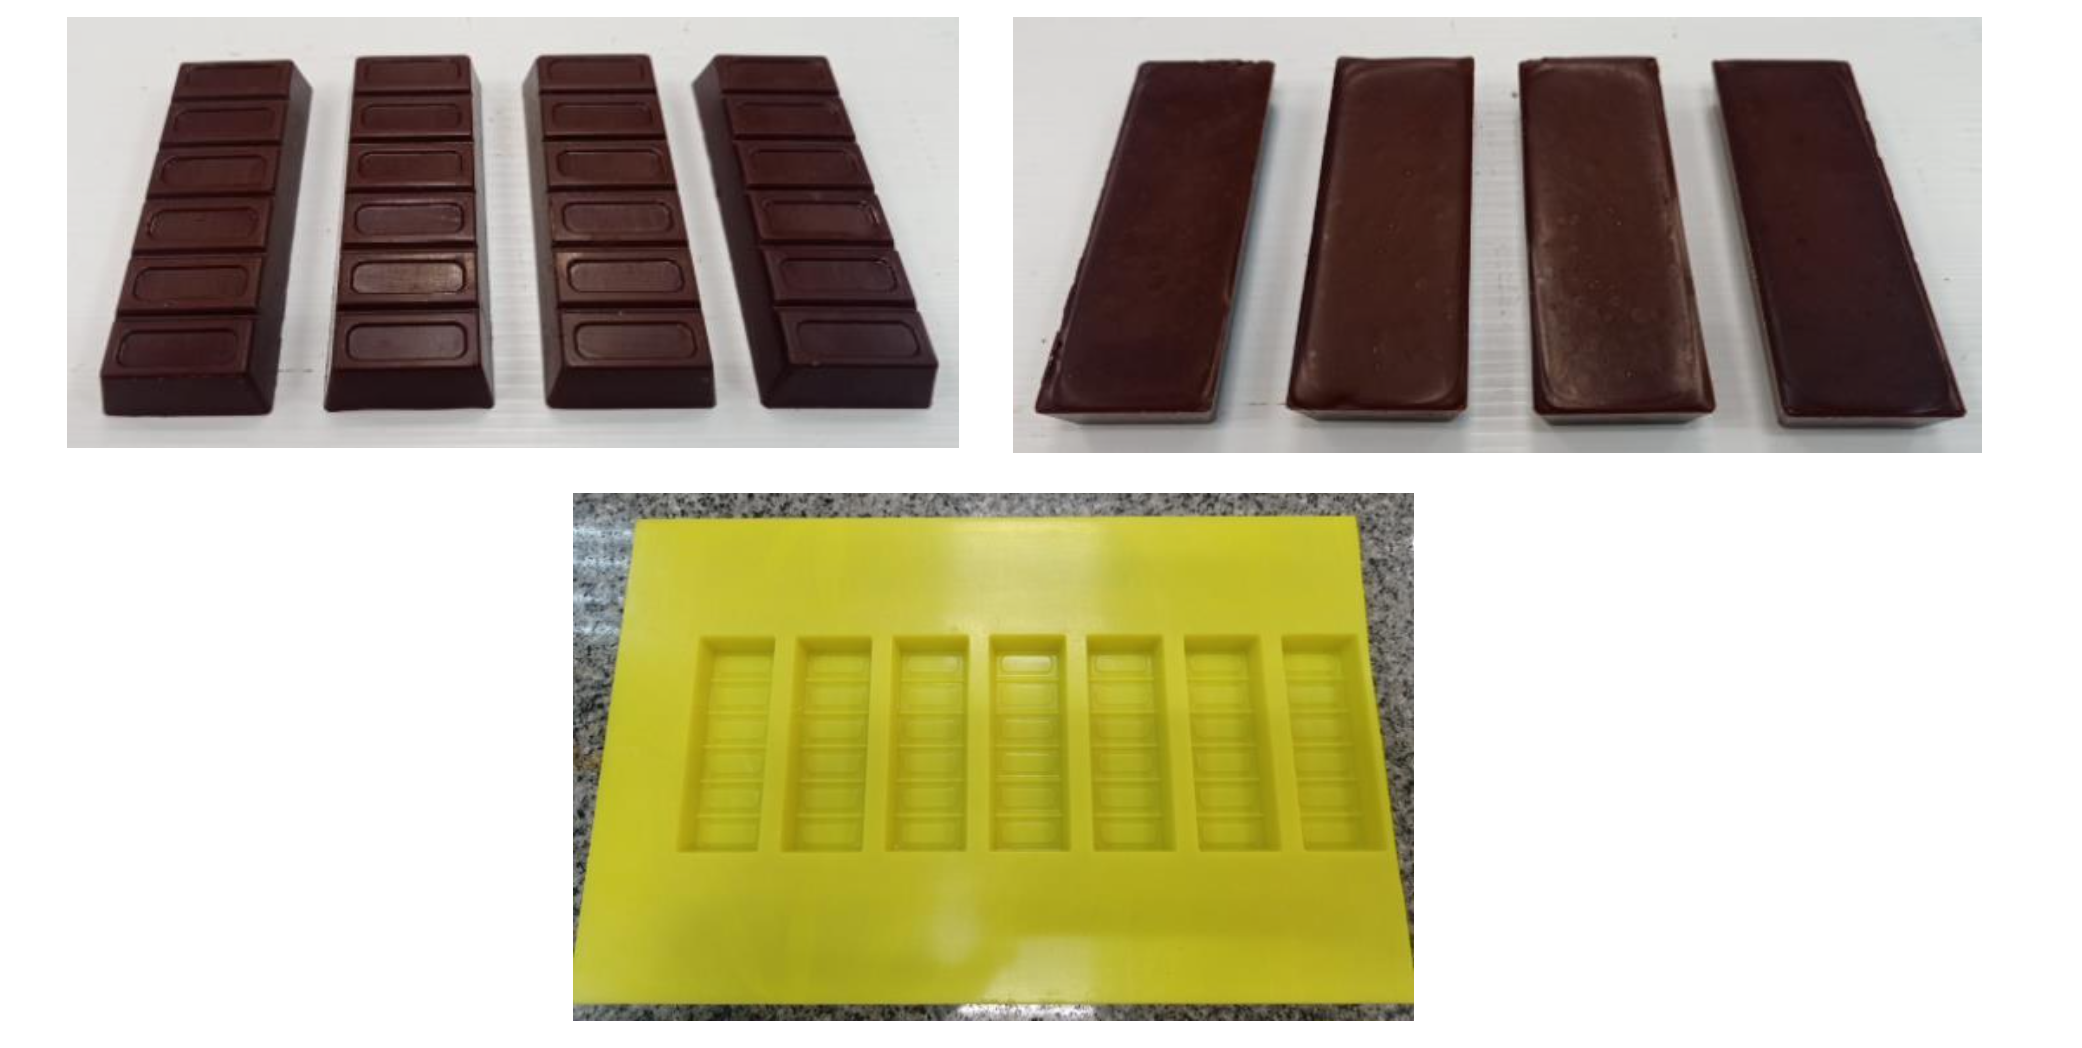 moldig-chocolate-bars-after-tempering